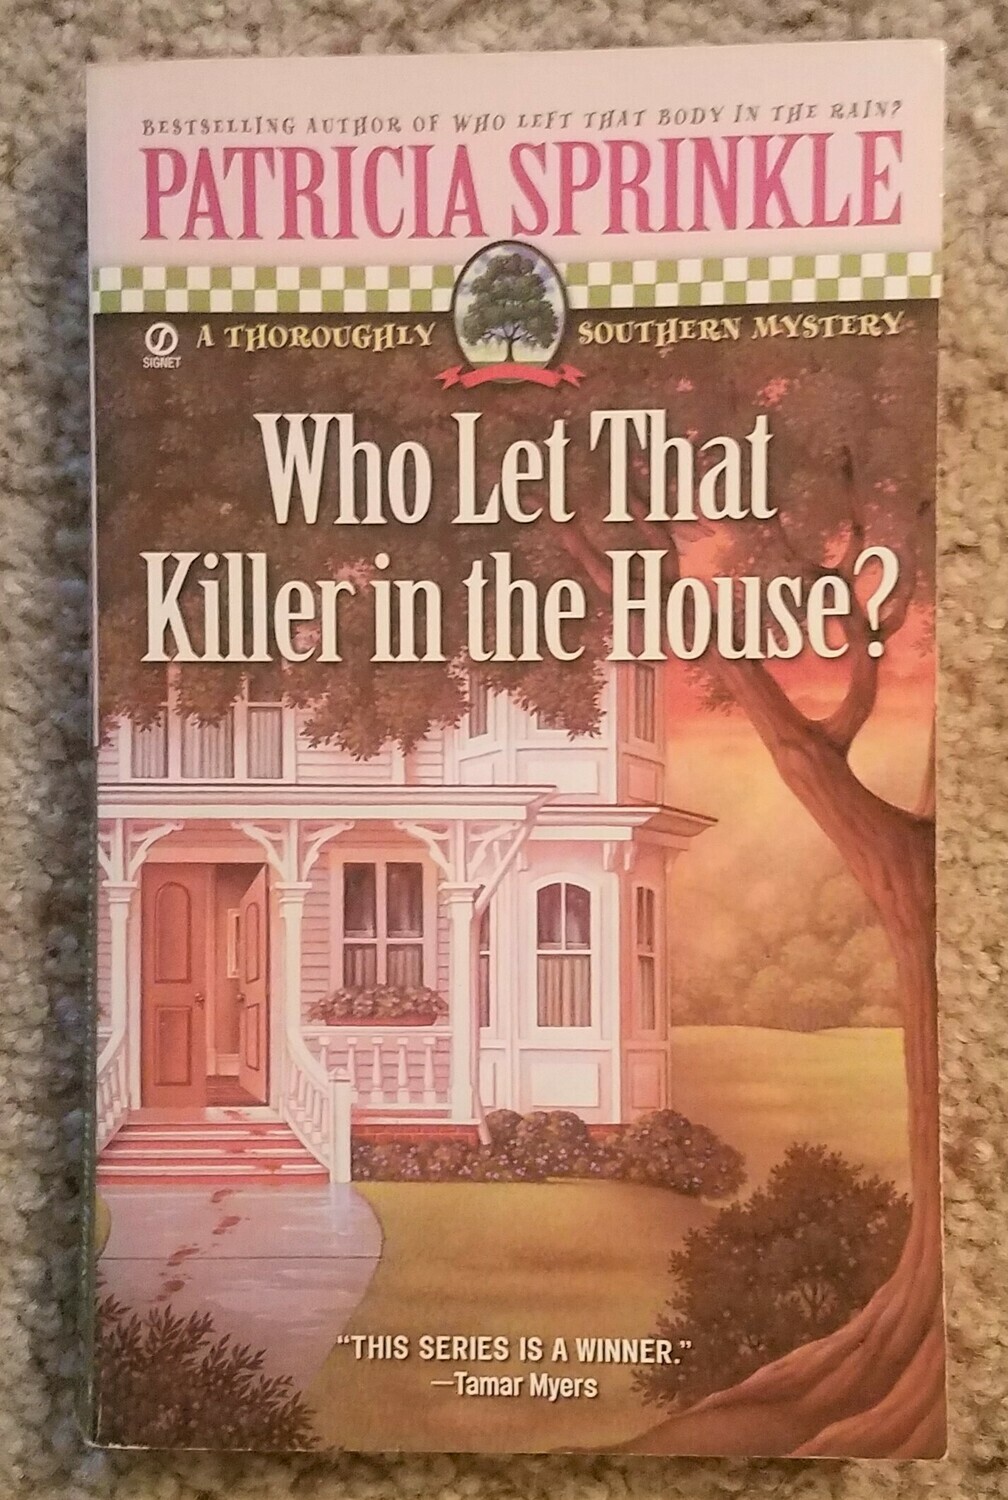 Who Let That Killer in the House? by Patricia Sprinkle